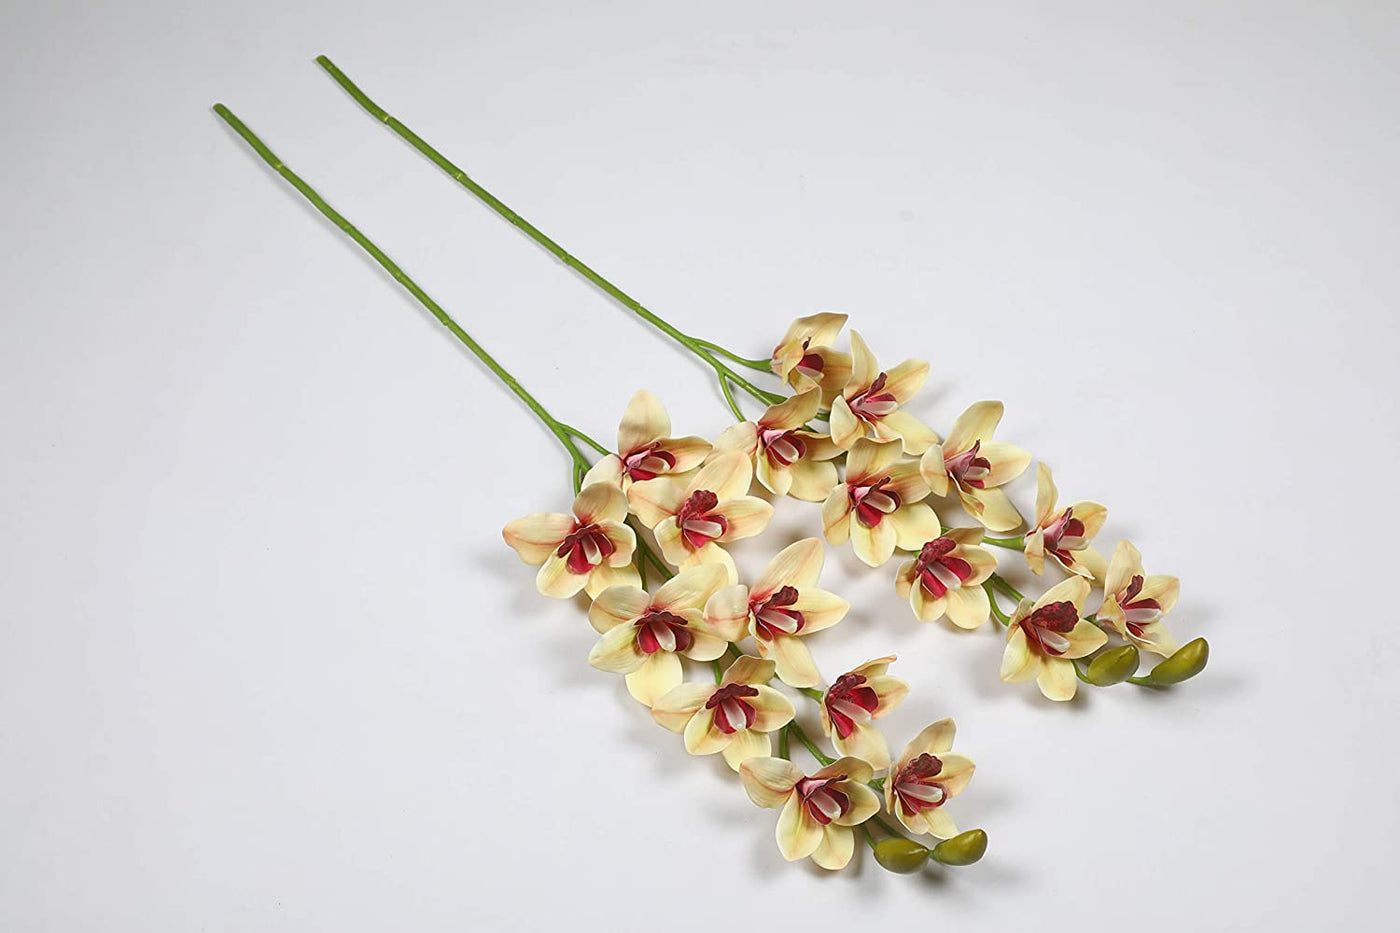 PolliNation Beautiful Artificial Brown Cymbidium Orchid Flower for Home Decoration (Pack of 2, 35 Inch) - Artificial Flowers & Plants - PolliNation